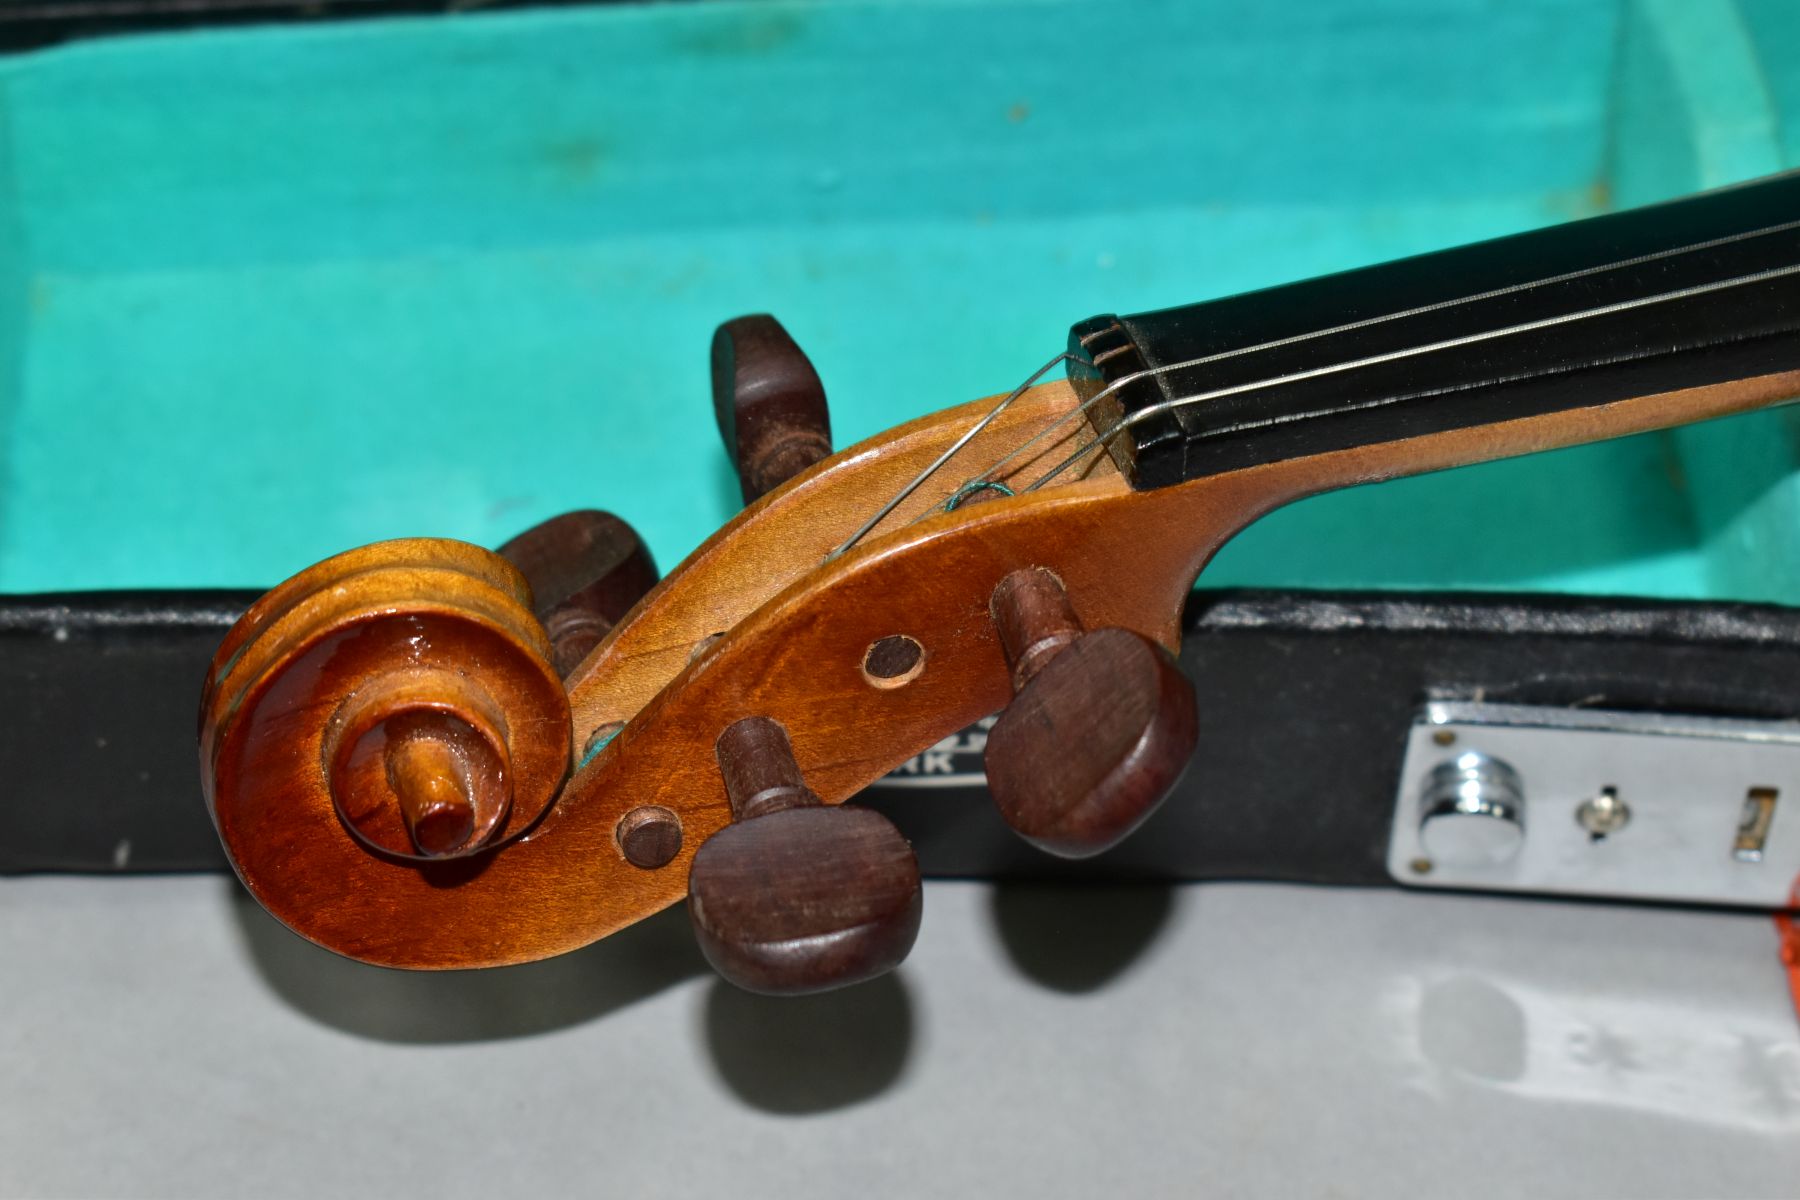 TWO STUDENT VIOLINS, BODY LENGTH APPROXIMATELY 35CM, one is a Chinese example with a Lark brand - Image 3 of 11